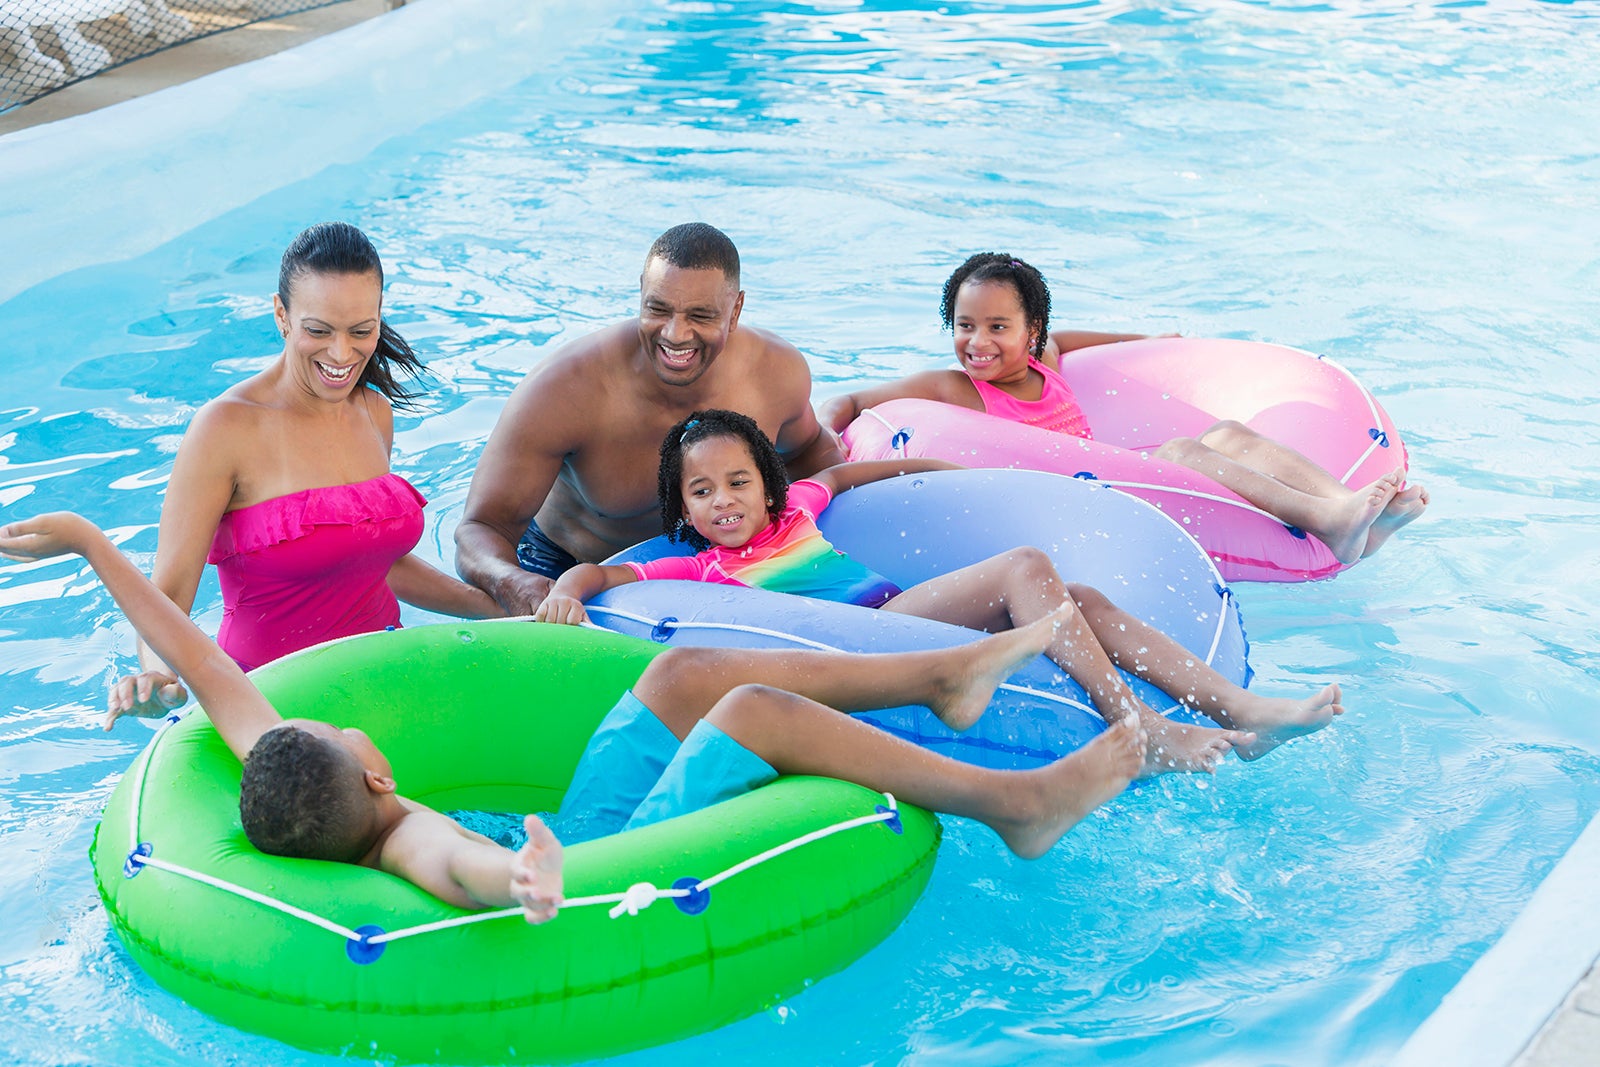 Mixed race family with three children at water park